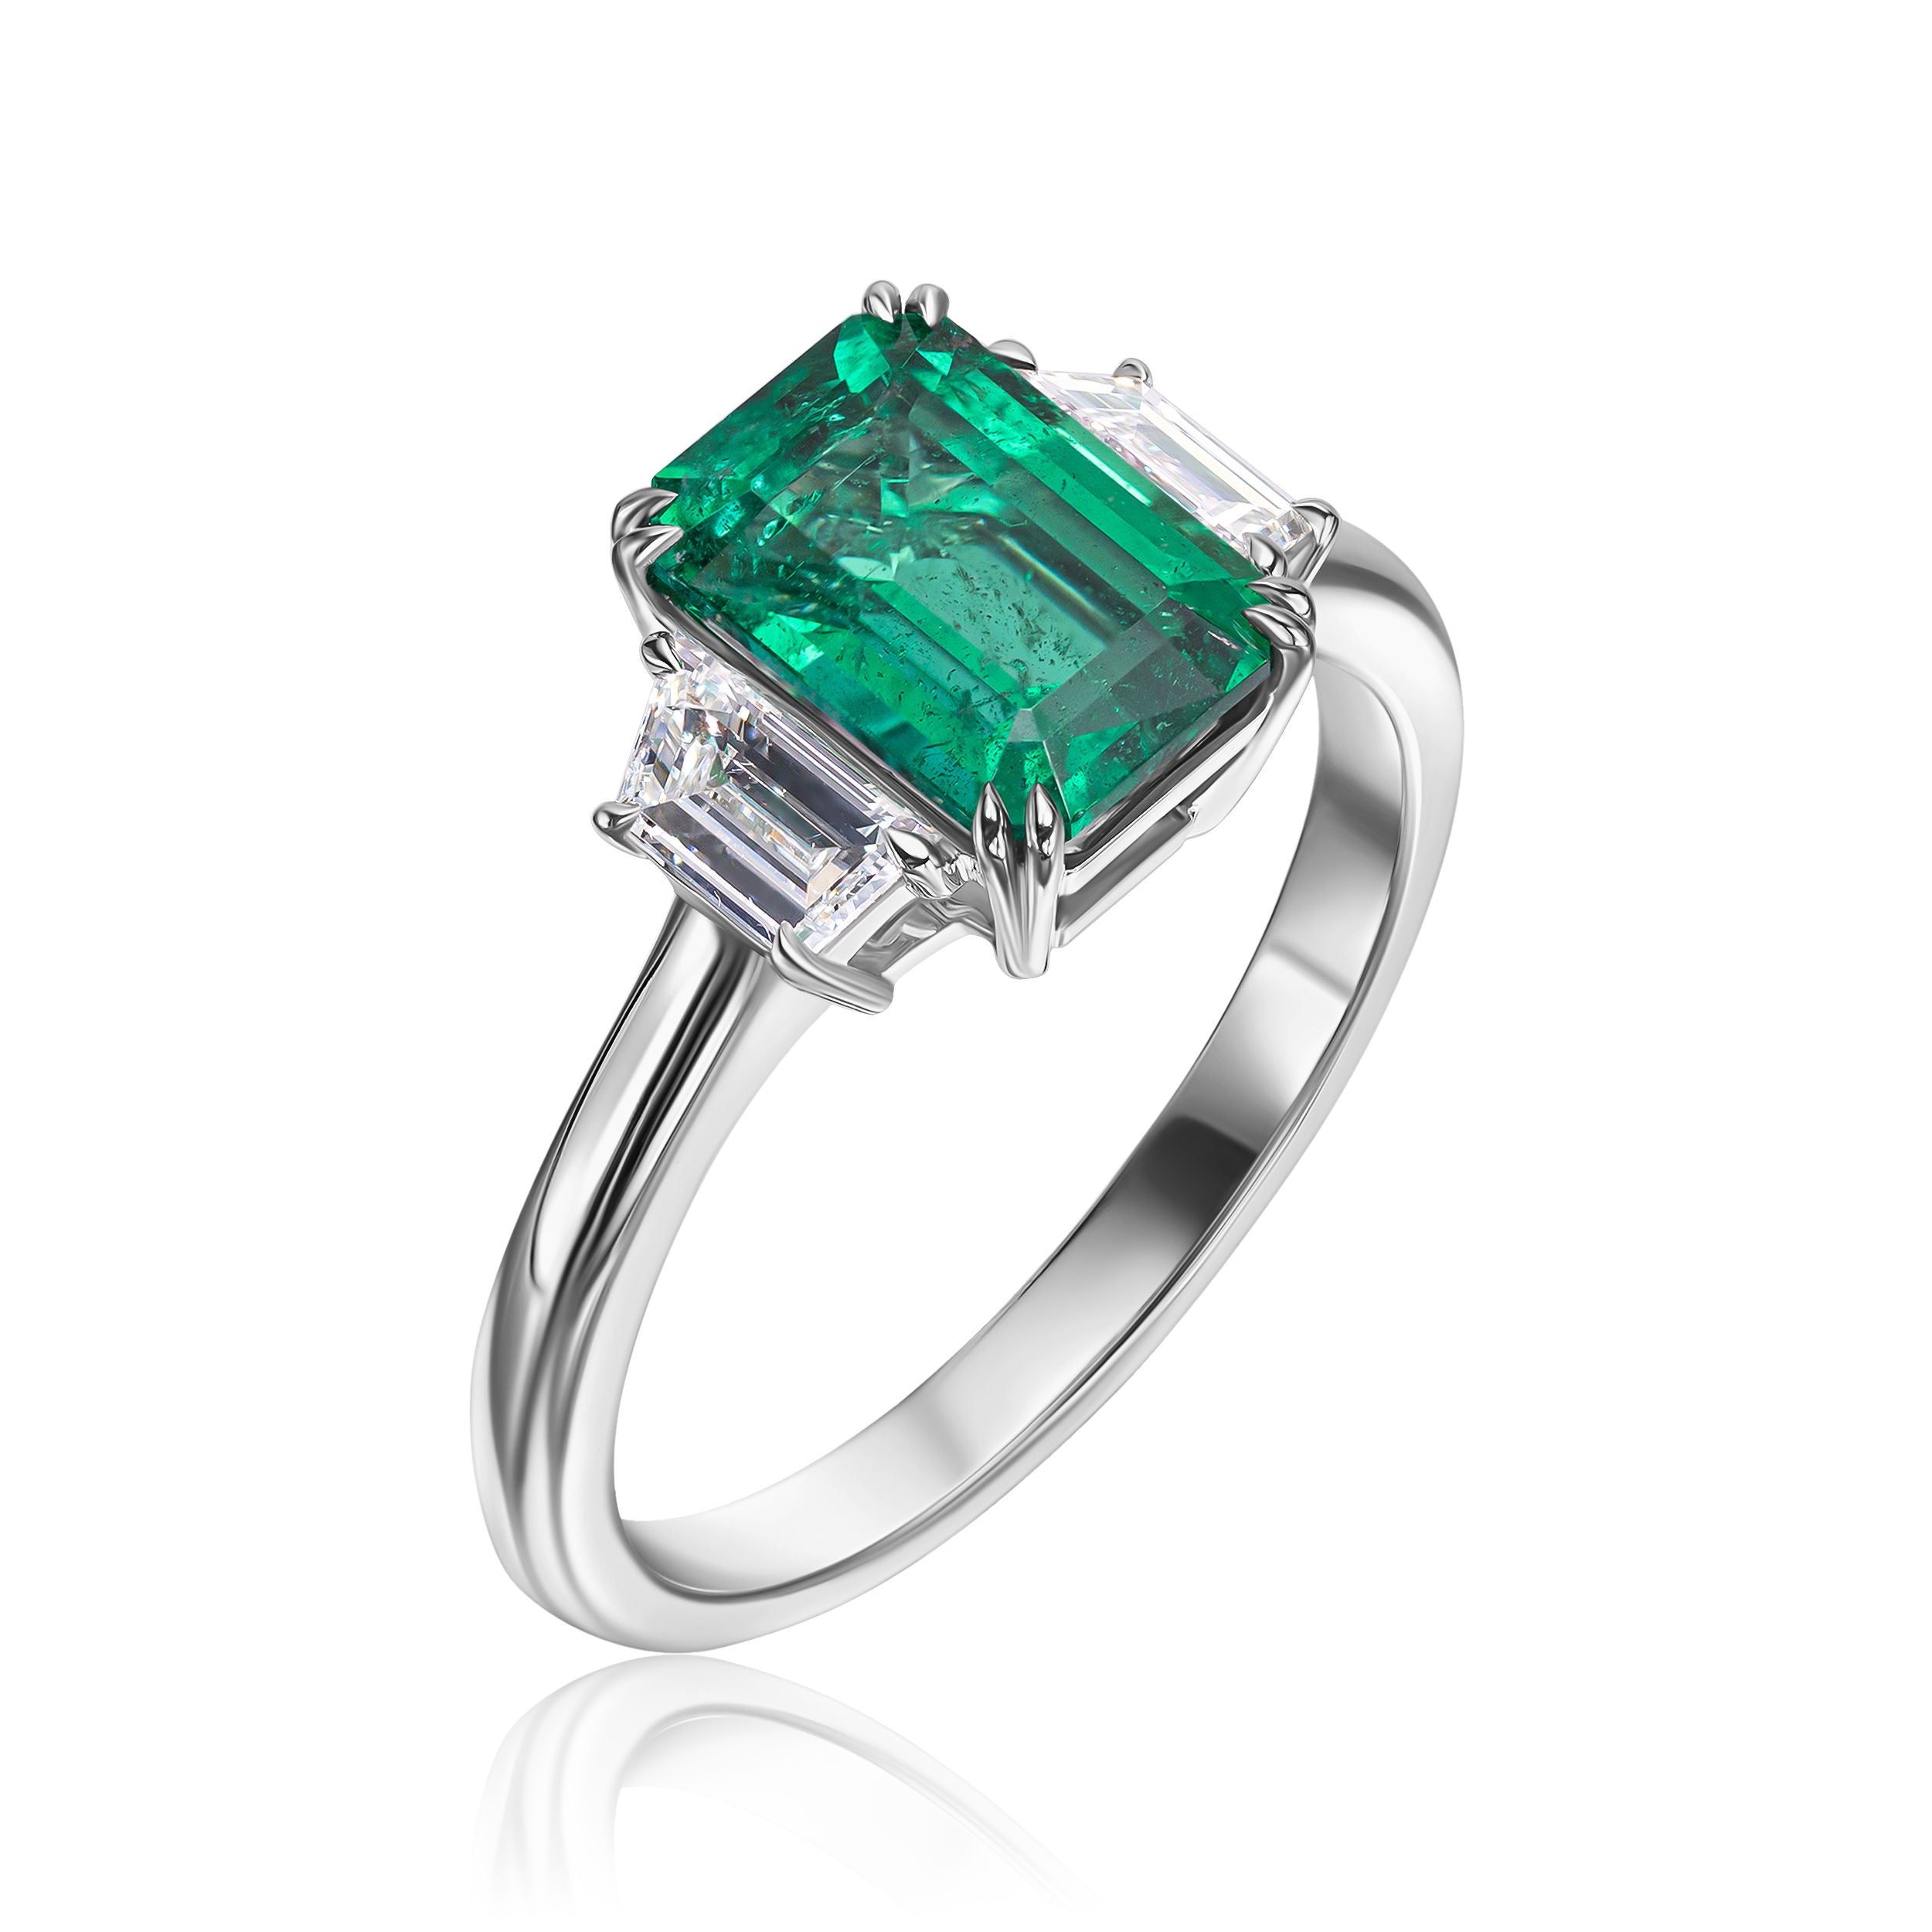 Emerald Cut Ring with Trapeziod - 2.59ct TW